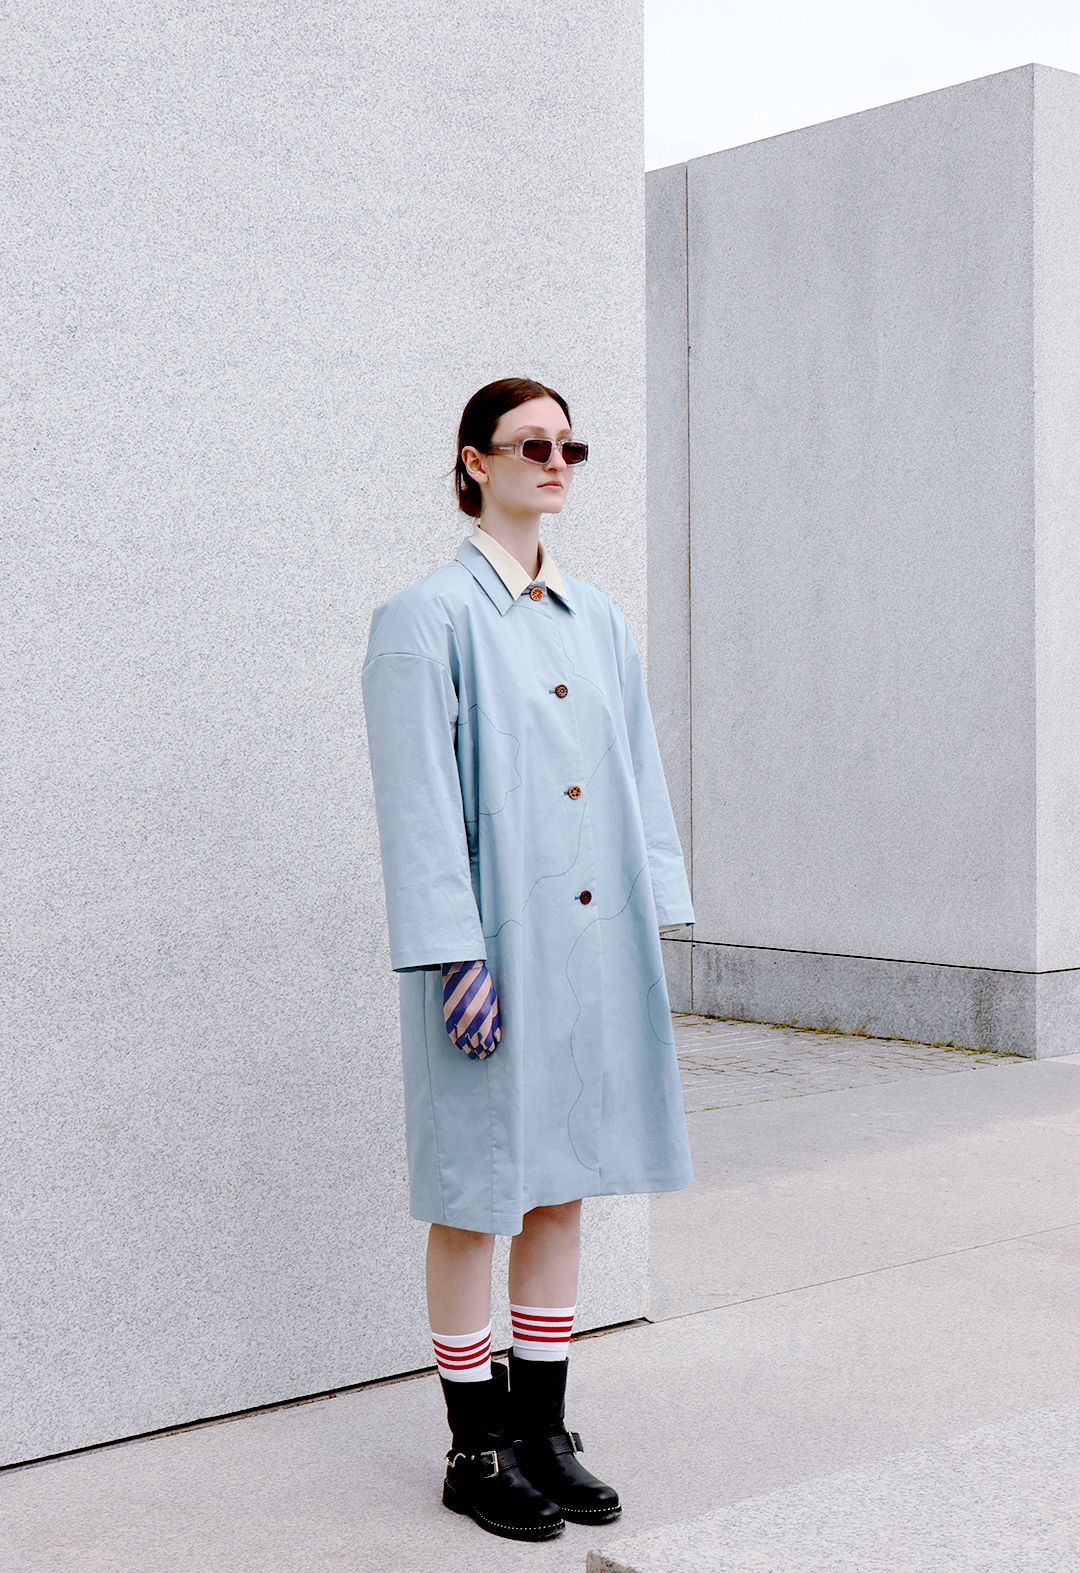 This is a long, blue oversized coat, with flower-inspired embroidery detail and ethnic wooden vintage buttons. It is accessorized with dark-blue mesh long-sleeved gloves, sunglasses, red striped socks, and black boots. The model is posed in front of a gray wall.